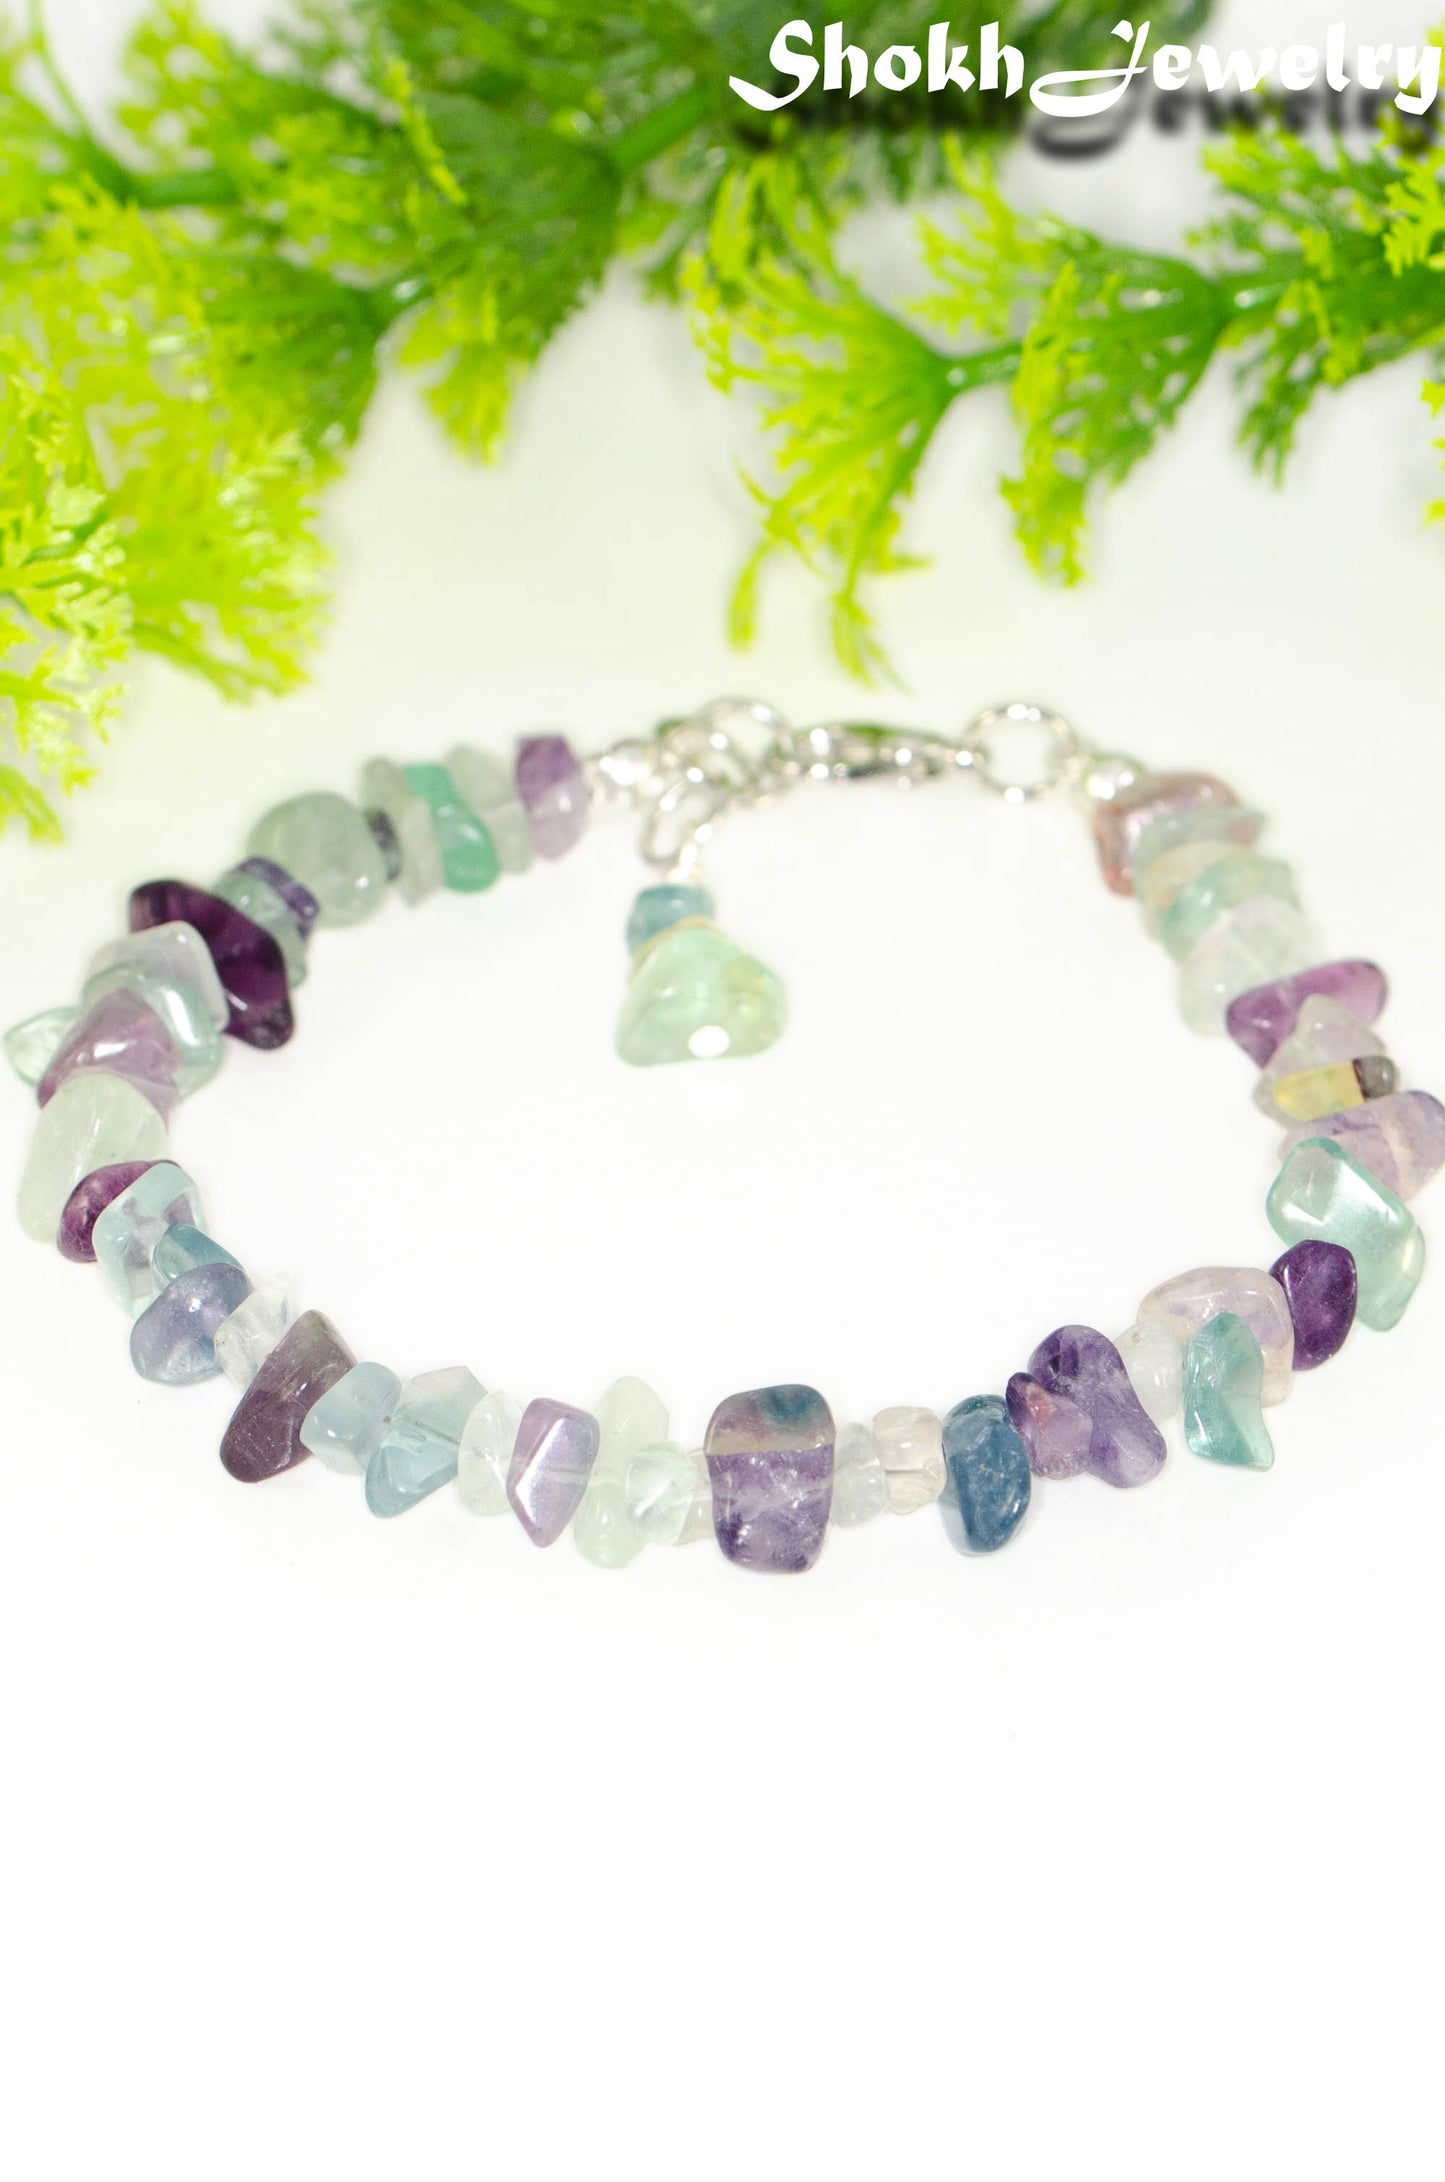 Close up of Natural Rainbow Fluorite Crystal Chip Bracelet.